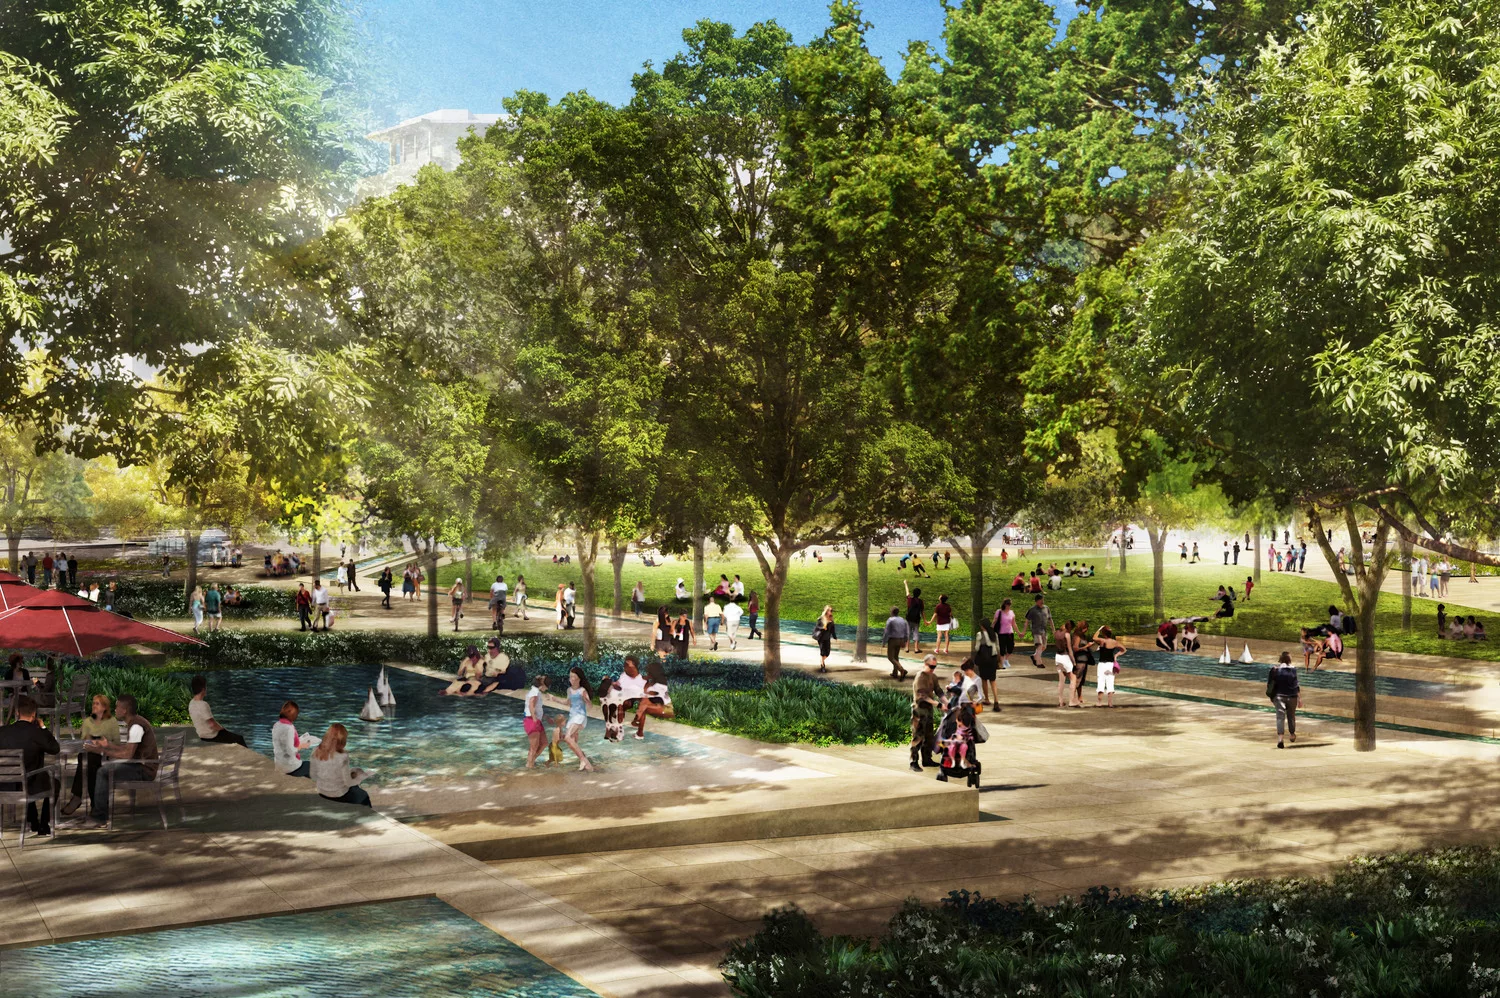 Daylight rendering of people enjoying the water features, covered seating areas, and pathways at the tree-filled Hemisfair Civic Park